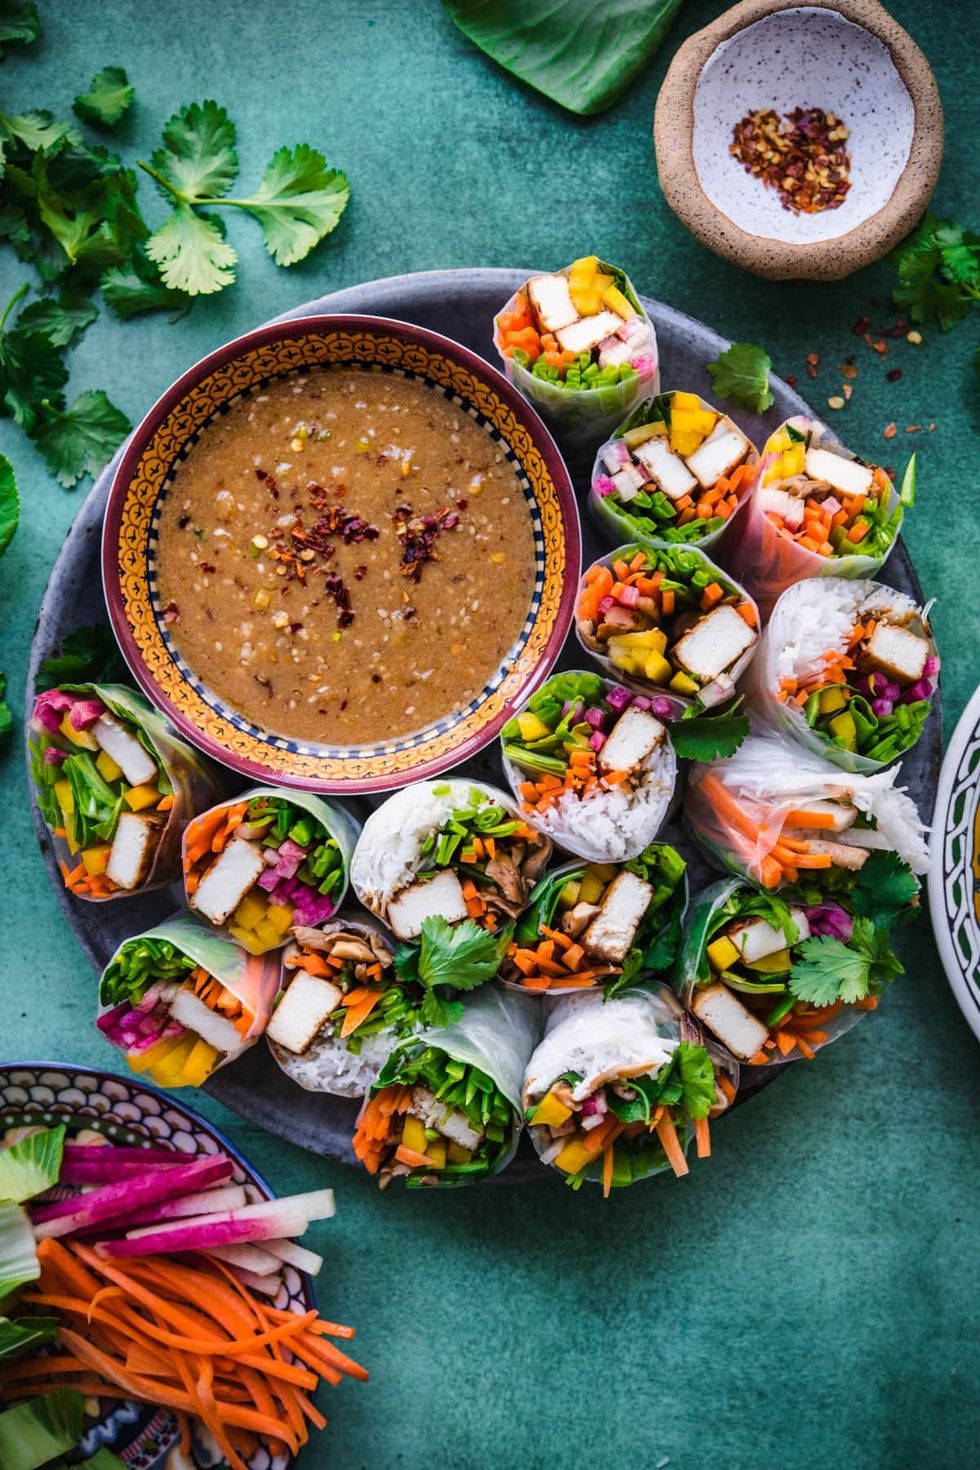 Vegan Summer Rolls with Miso Dipping Sauce